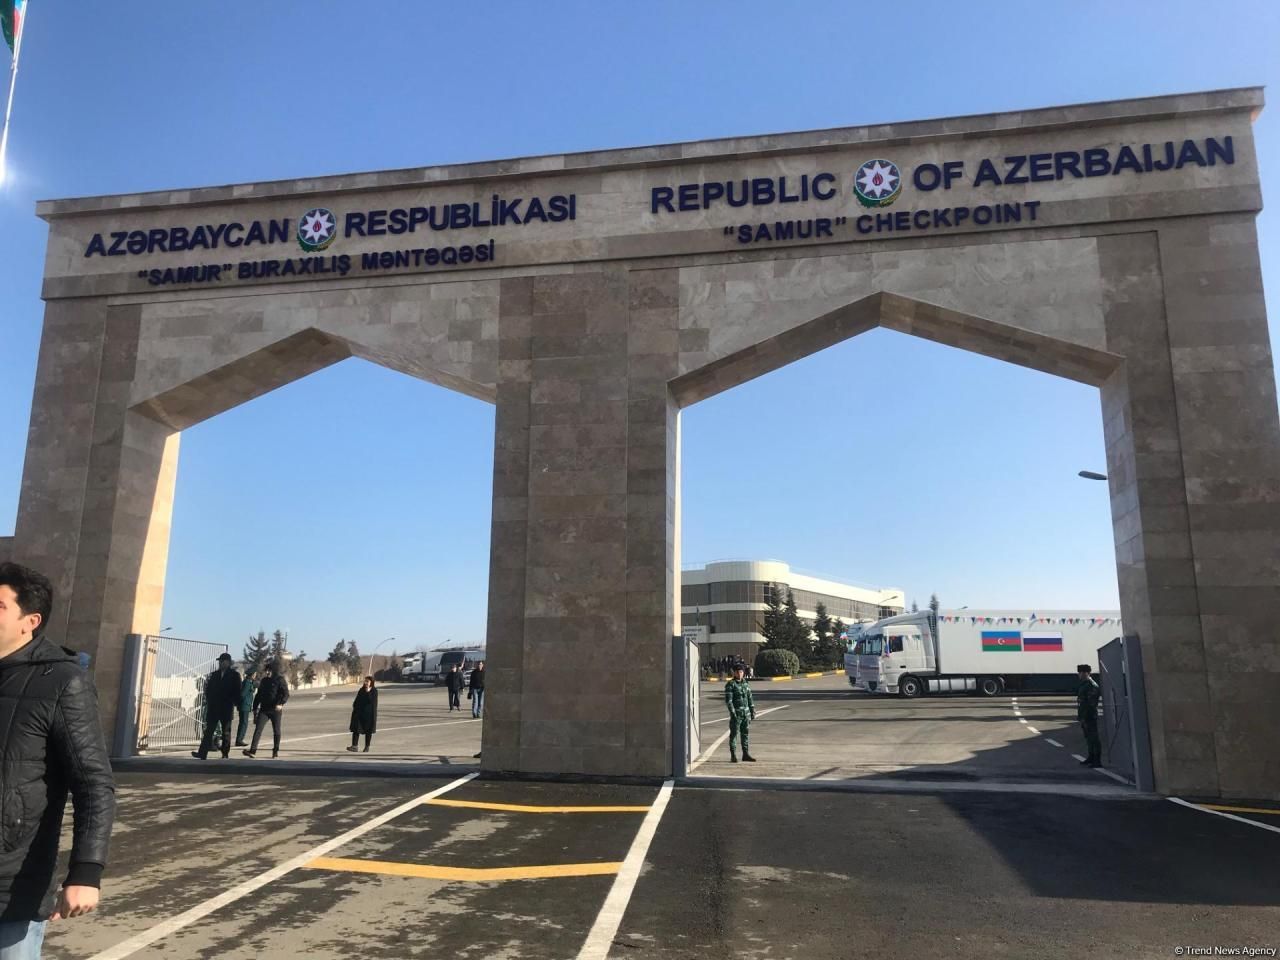 Reconstruction of Russia-Azerbaijan border checkpoints to complete by 2026